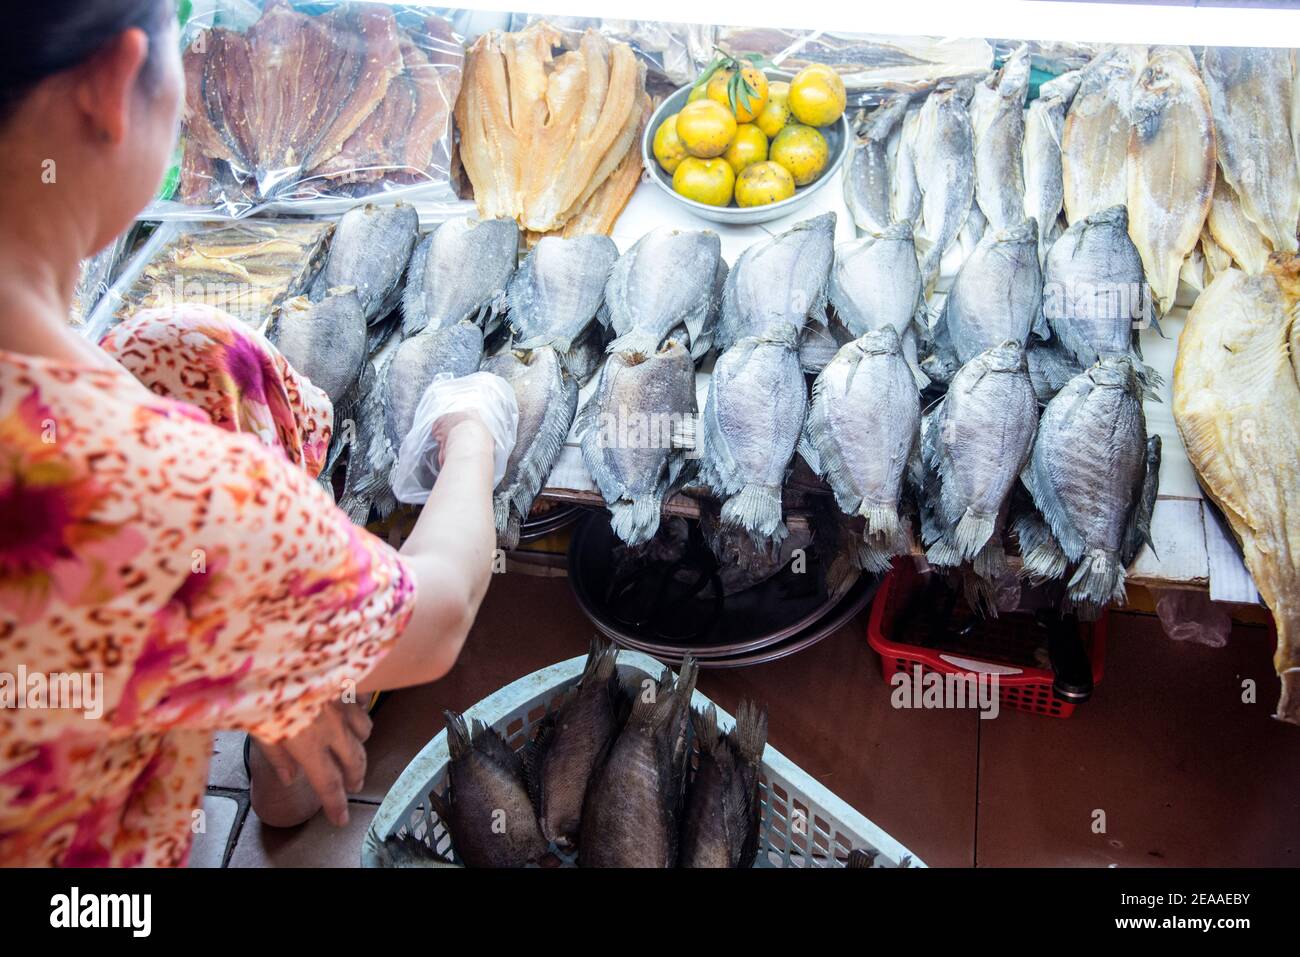 Fish stall in the indoor market in Ho Chi Minh City, Vietnam Stock Photo